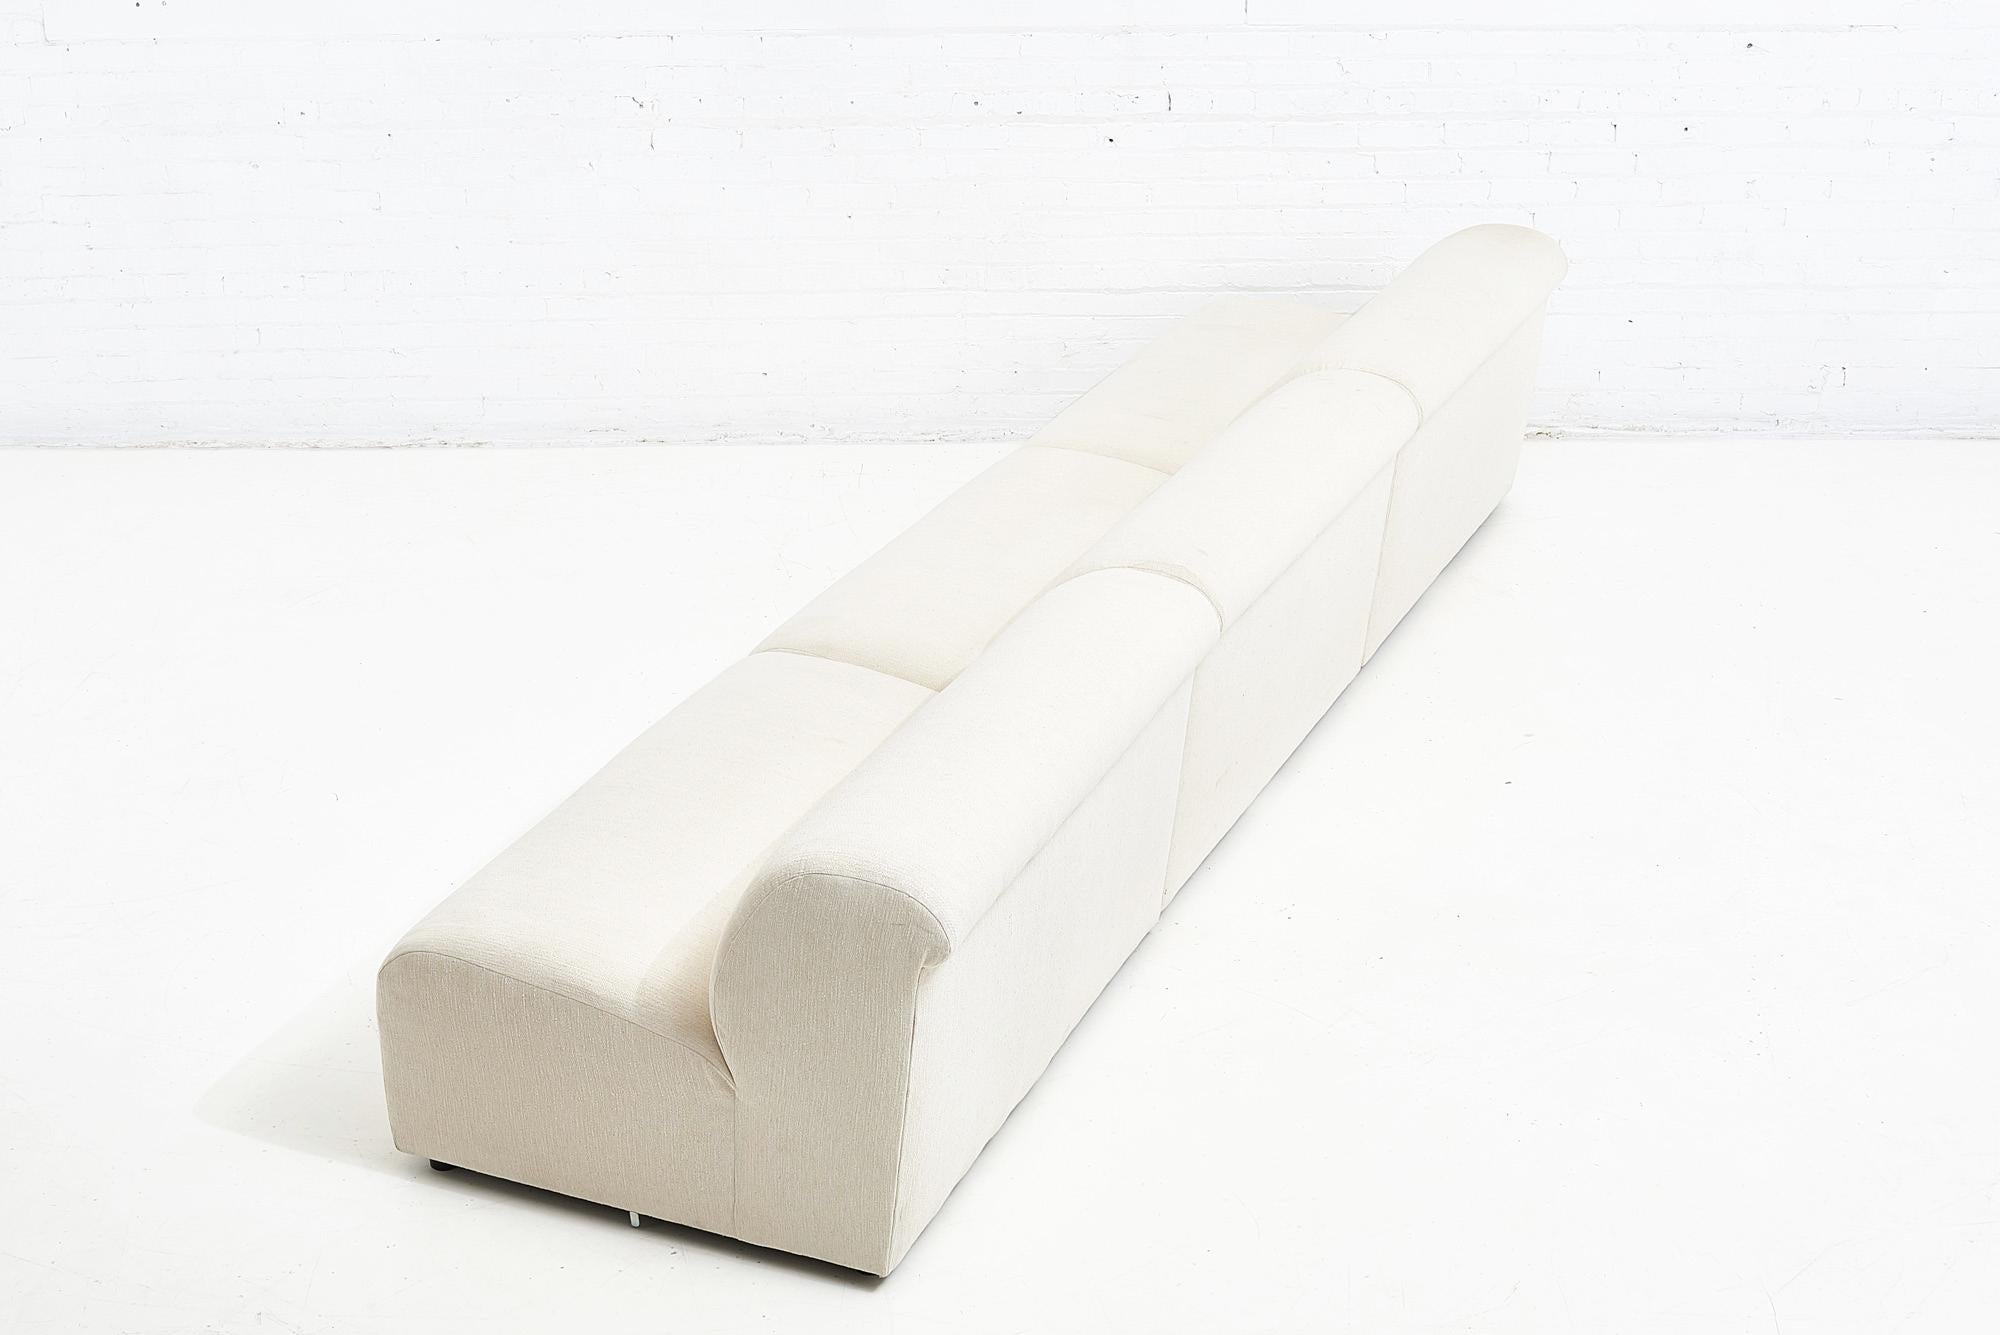 Late 20th Century 3 Piece Modular Sofa by Vladimir Kagan for Preview, 1988 For Sale